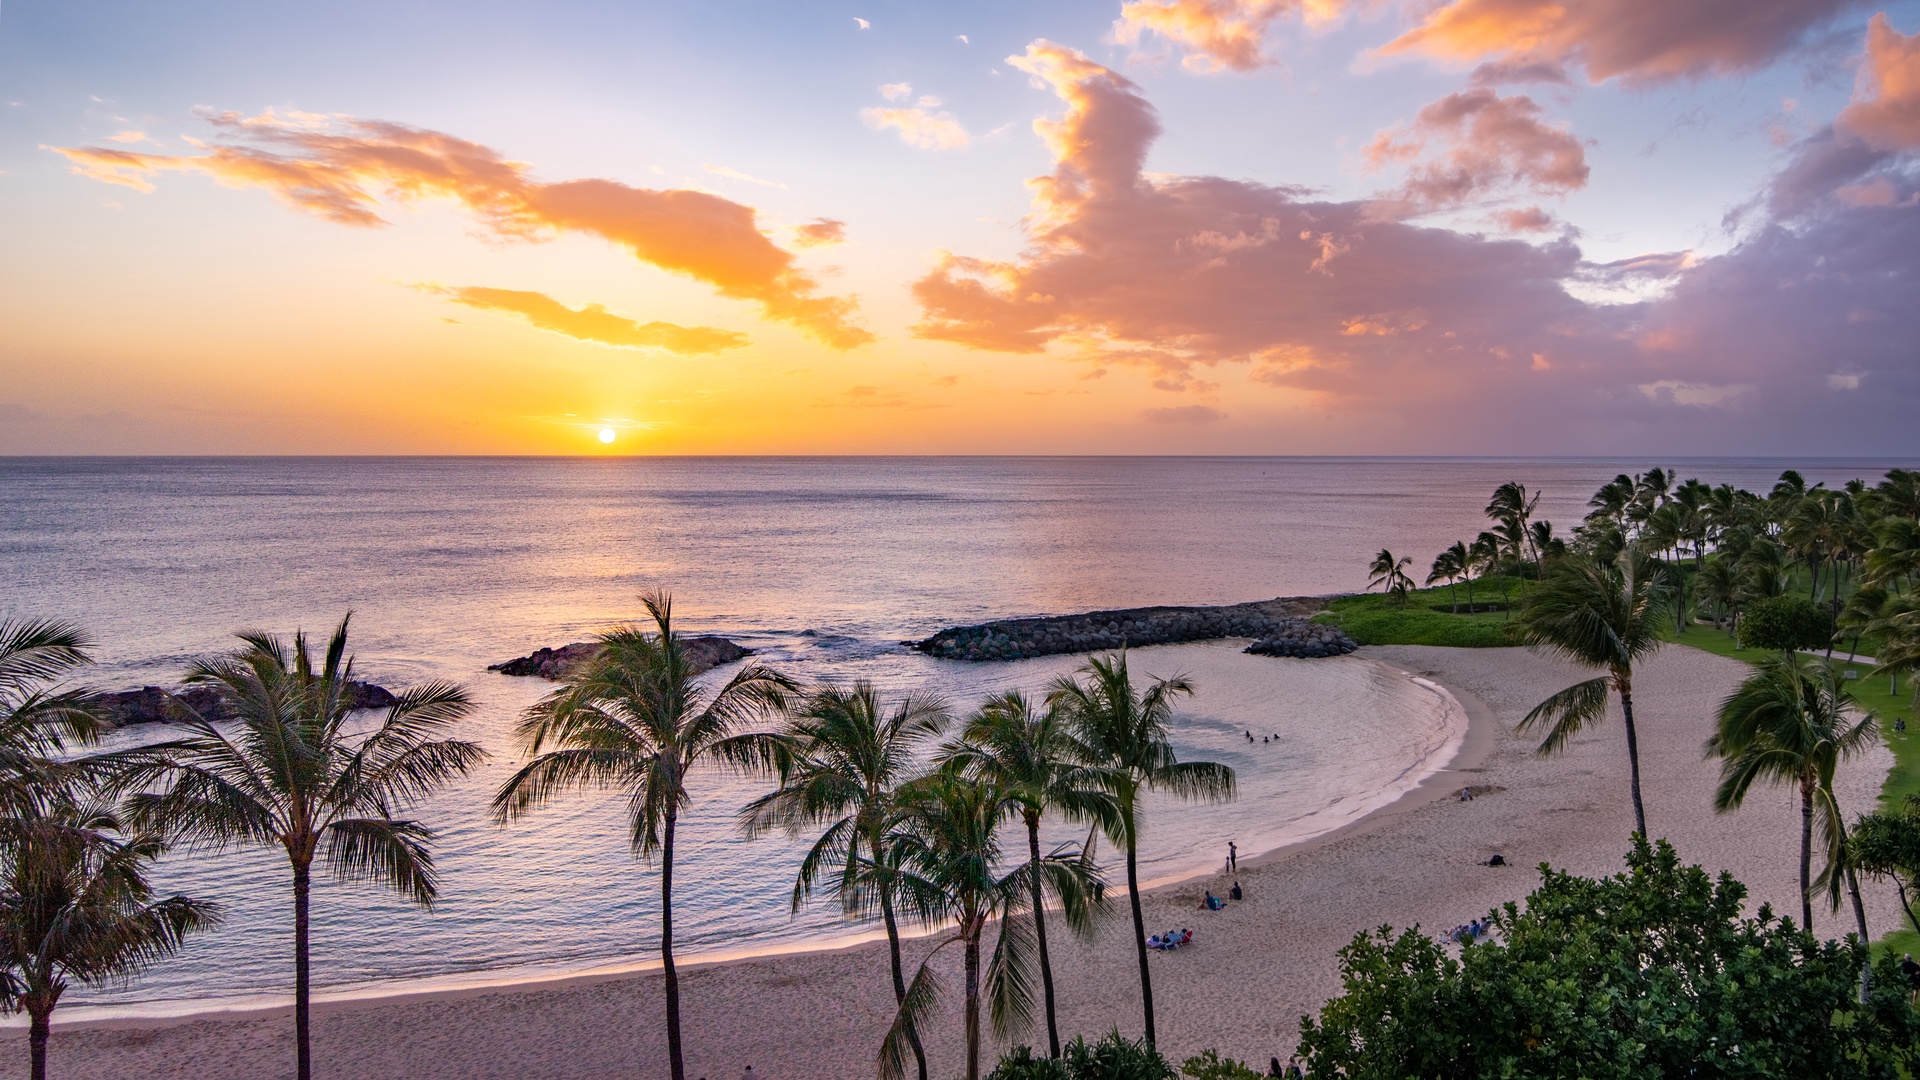 Kapolei Vacation Rentals, Ko Olina Beach Villas B609 - Peaceful sunsets and sparkling waters on the island.